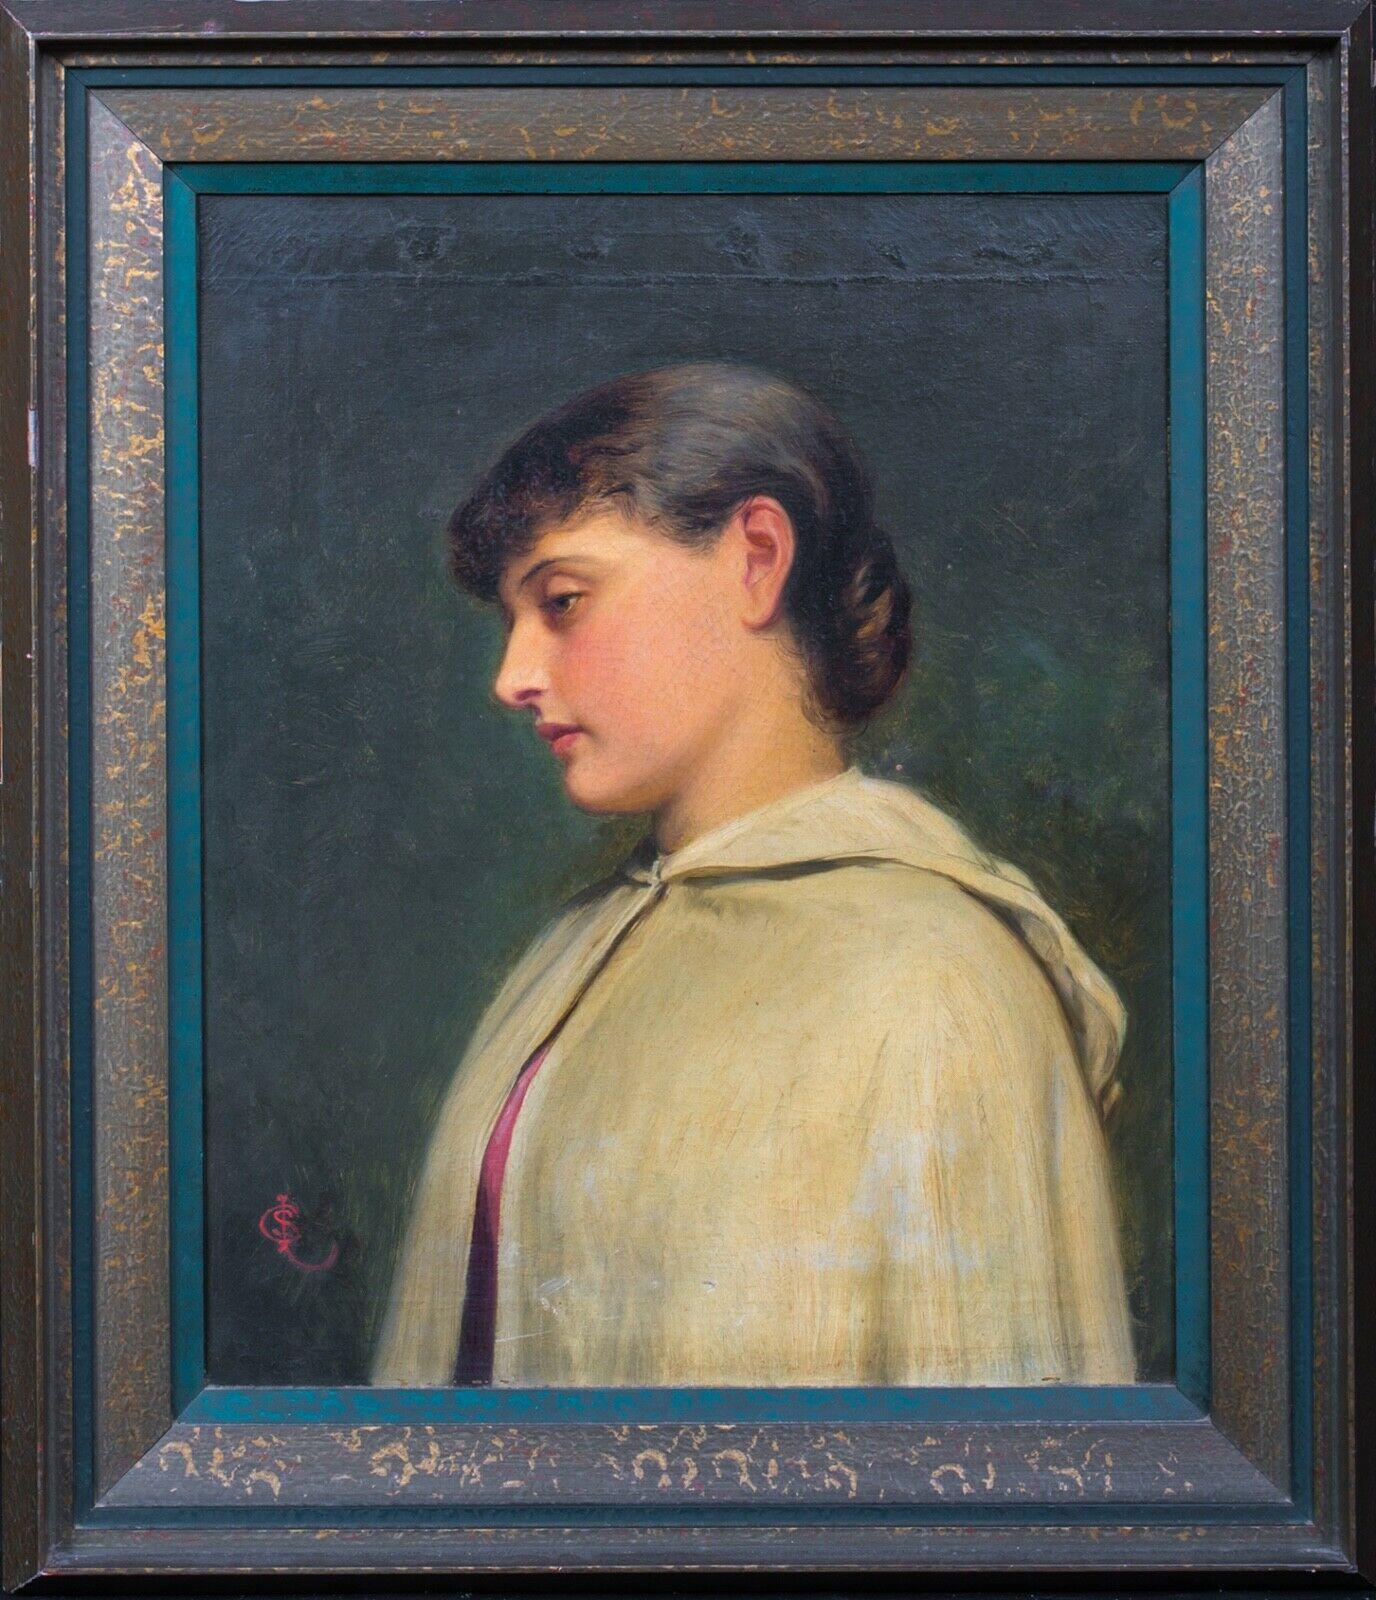 Portrait Of A Girl Wearing White Cloak, 19th Century - Painting by Charles Sillem Lidderdale 